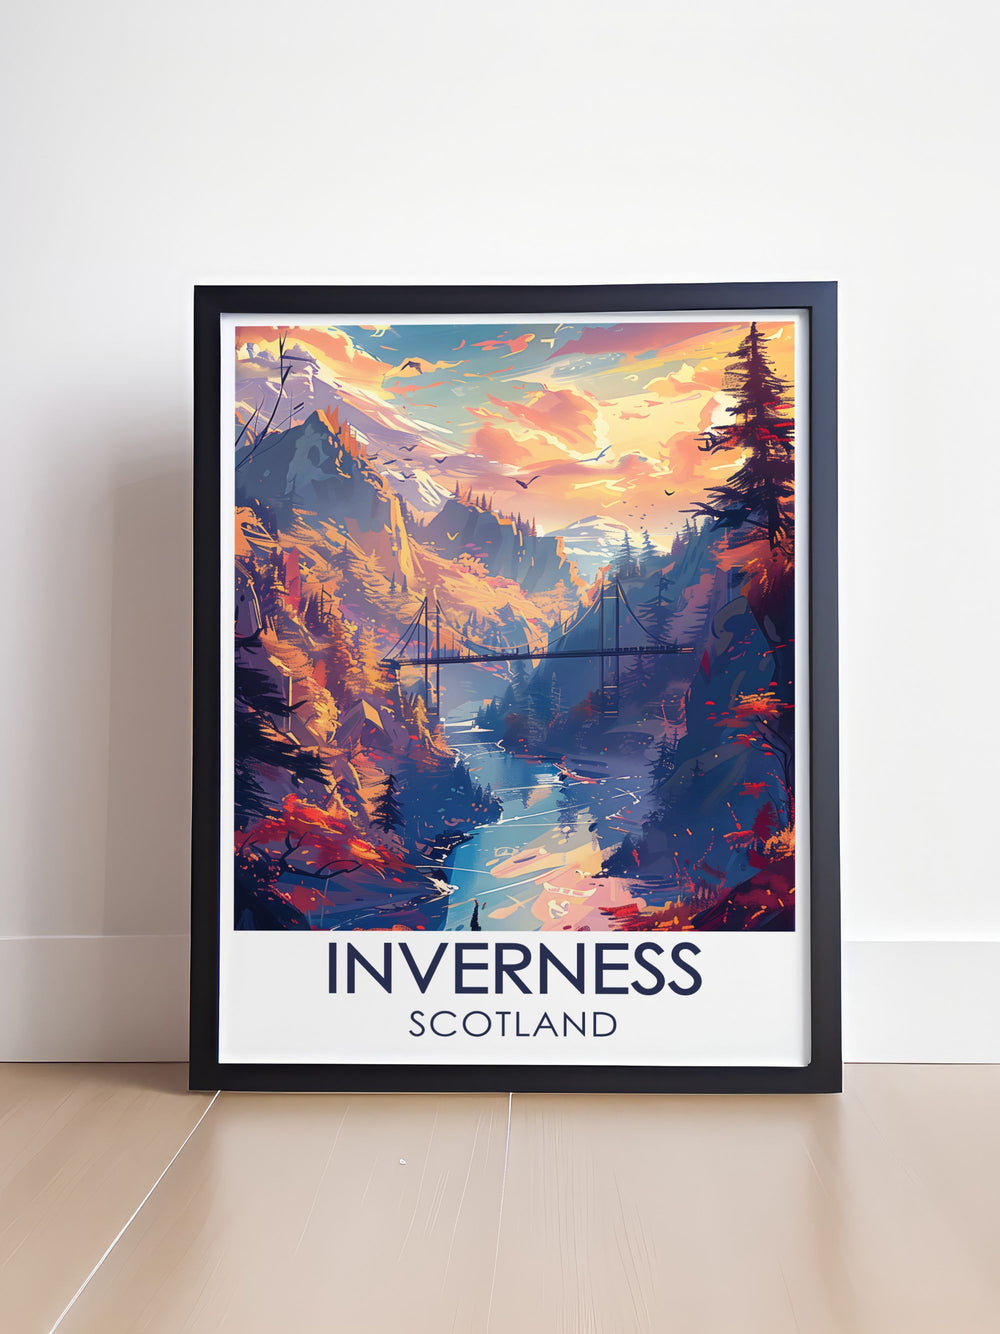 Detailed fine art print of the Great Glen Way, capturing the breathtaking landscapes, from serene lochs to rugged mountains, along Scotlands famous long distance trail.